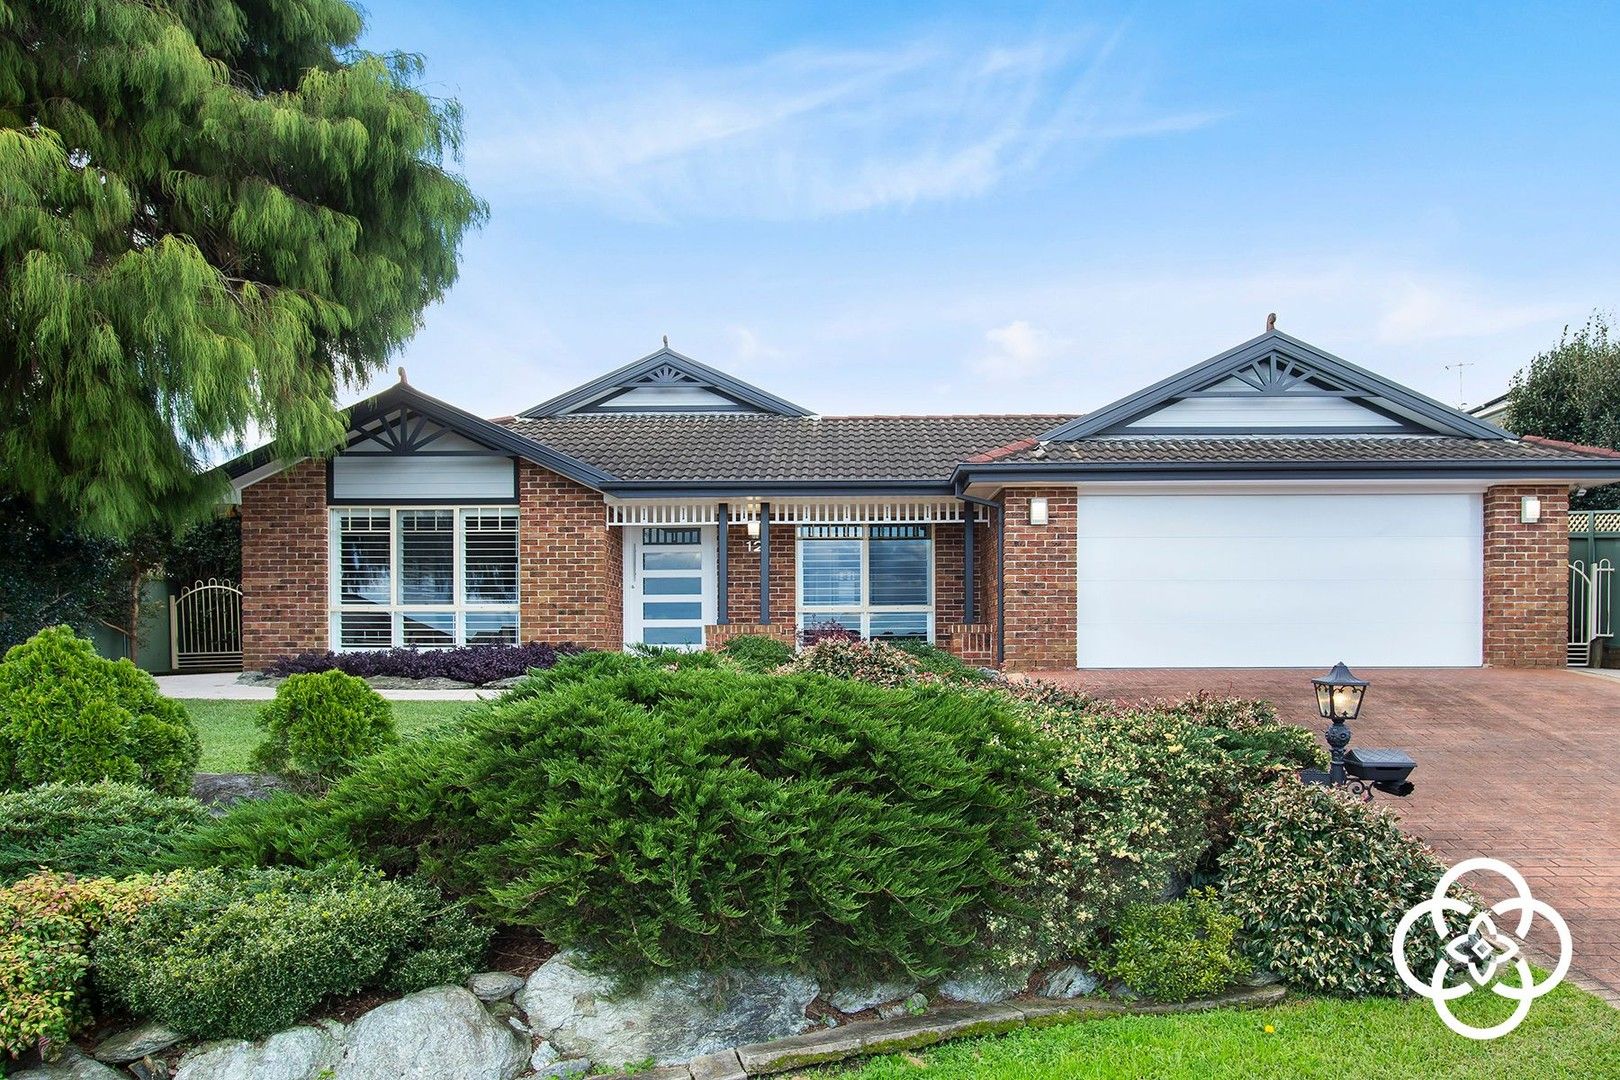 4 bedrooms House in 12 Stonecrop Place GARDEN SUBURB NSW, 2289